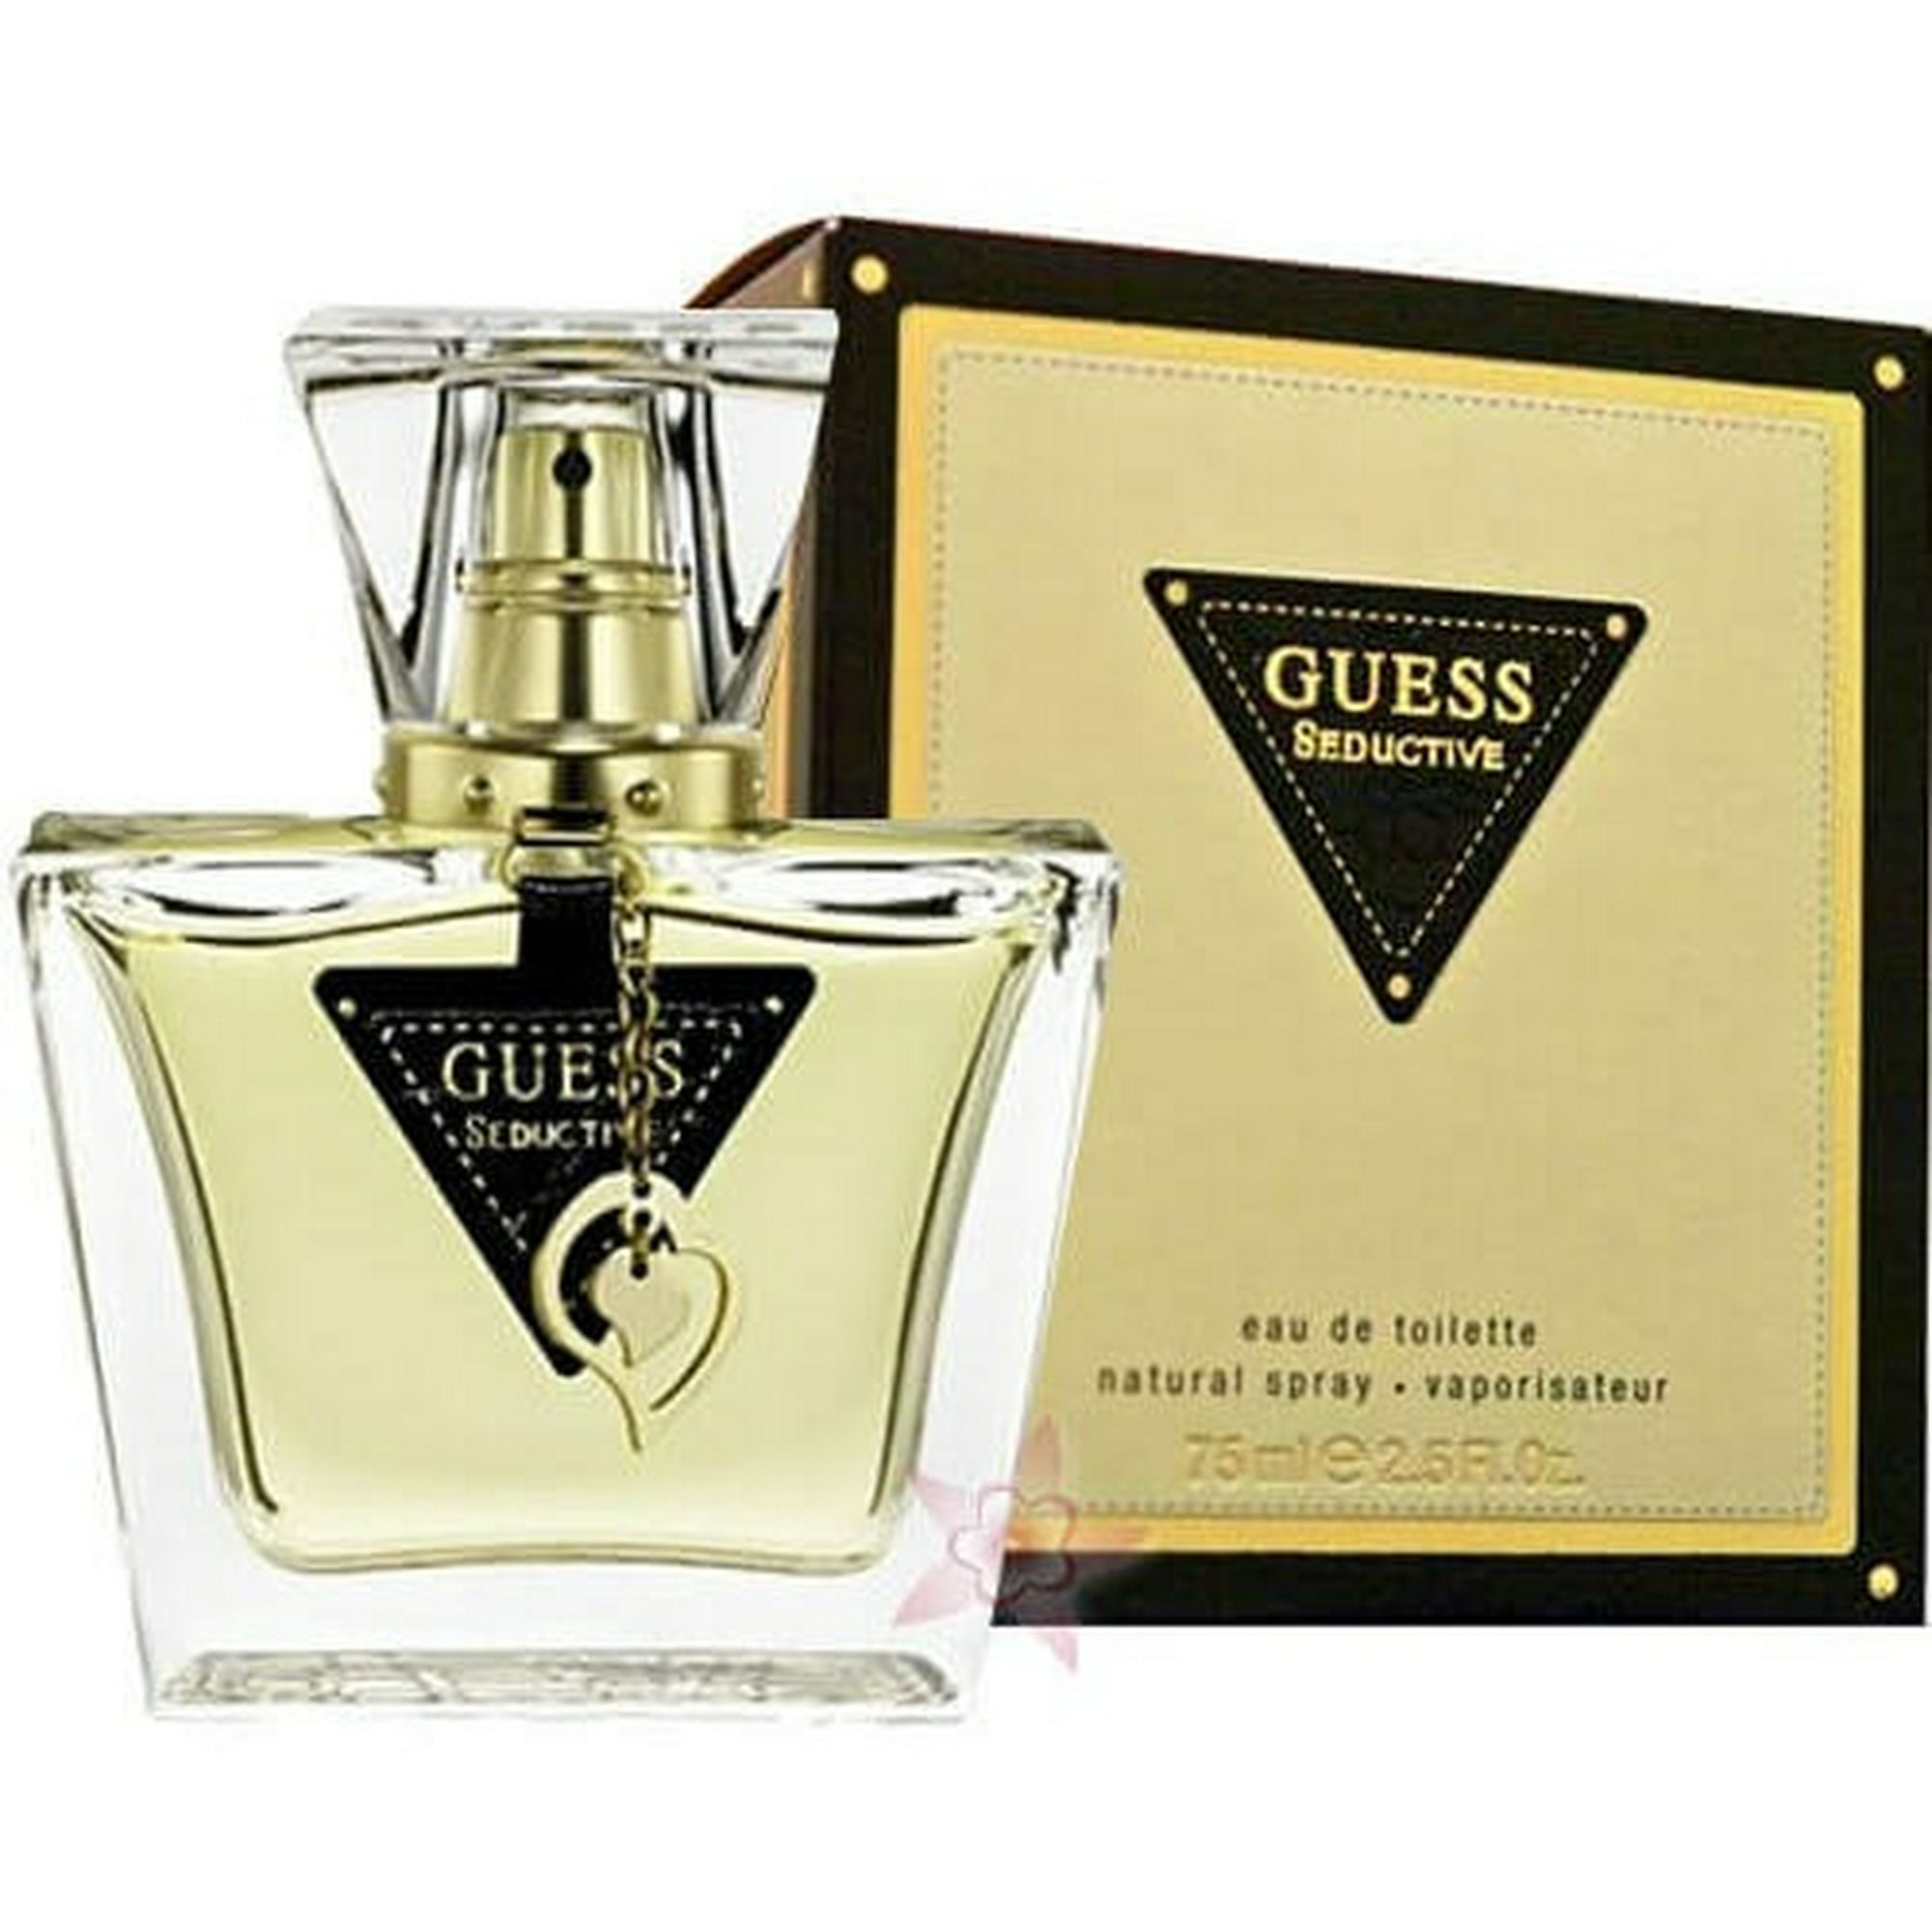 Perfume Guess Seductive Mujer De Guess Edt 75 Ml Original Guess Guess Seductive Guess Walmart